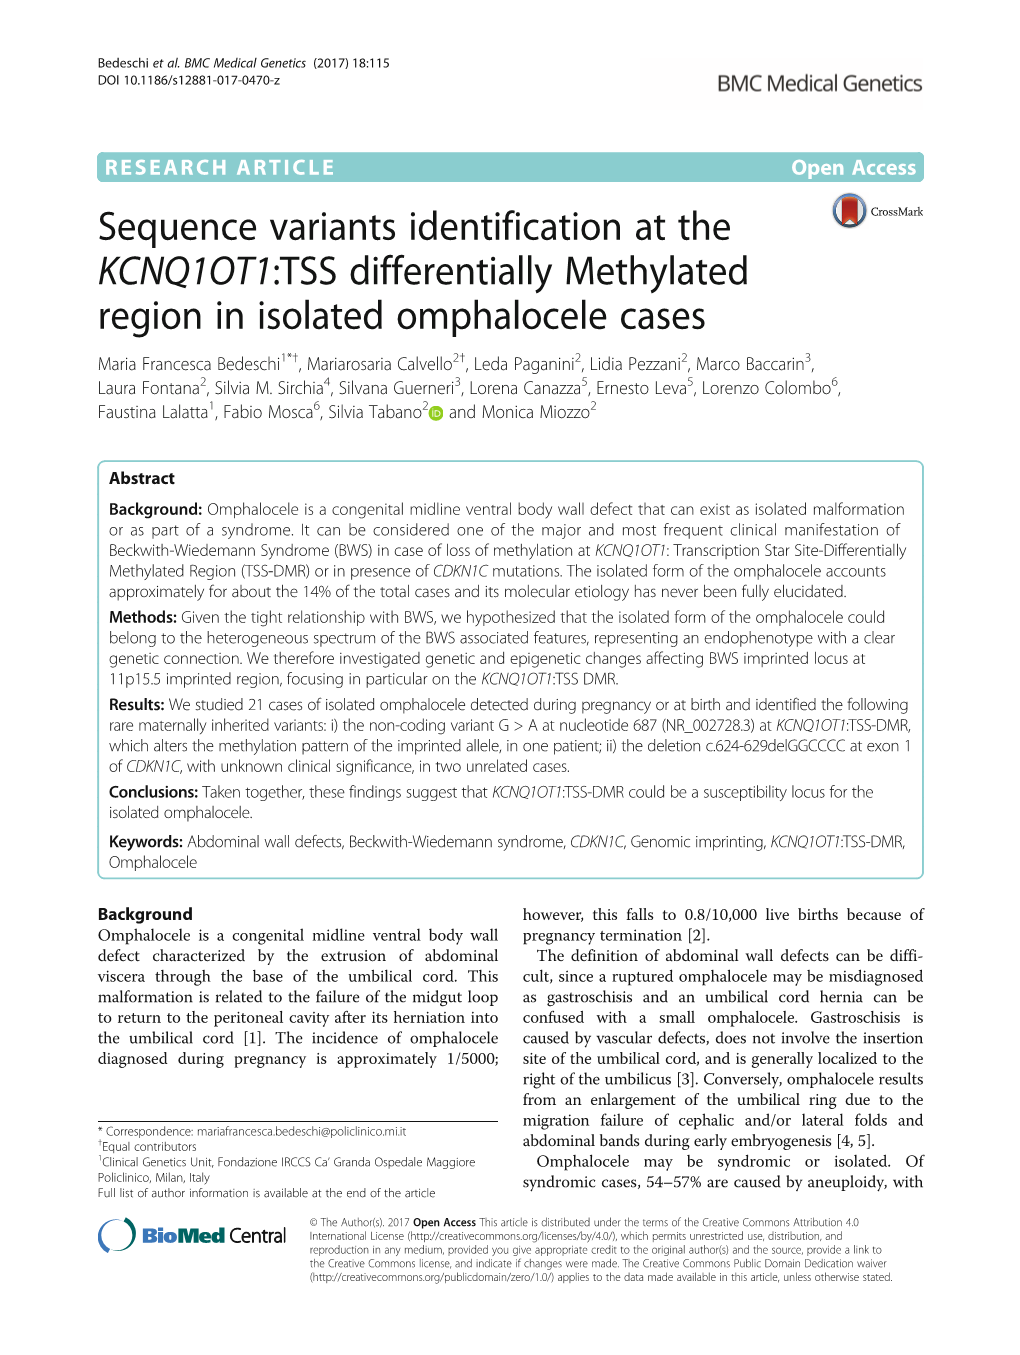 Sequence Variants Identification at the KCNQ1OT1:TSS Differentially